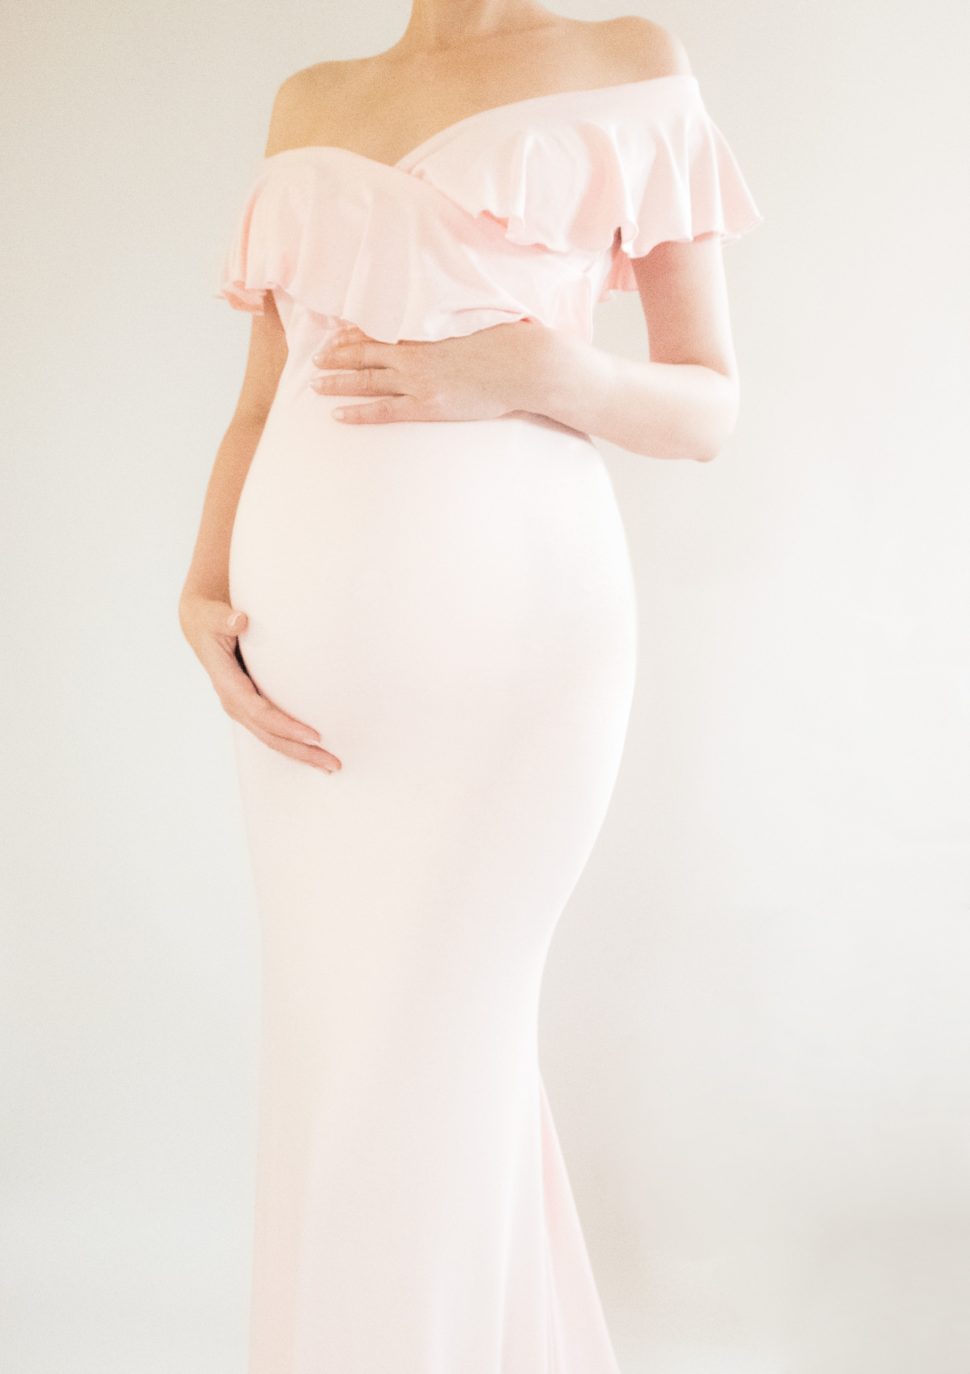 Medium Size of Baby Shower:what Should I Wear To My Baby Shower Cute Baby Shower Outfits For Mom Stylish Maternity Dresses For Baby Shower Maternity Clothes Target Pink Maternity Dress Baby Shower Attire For Mom Maternity Gown Style Maternity Gowns For Photography